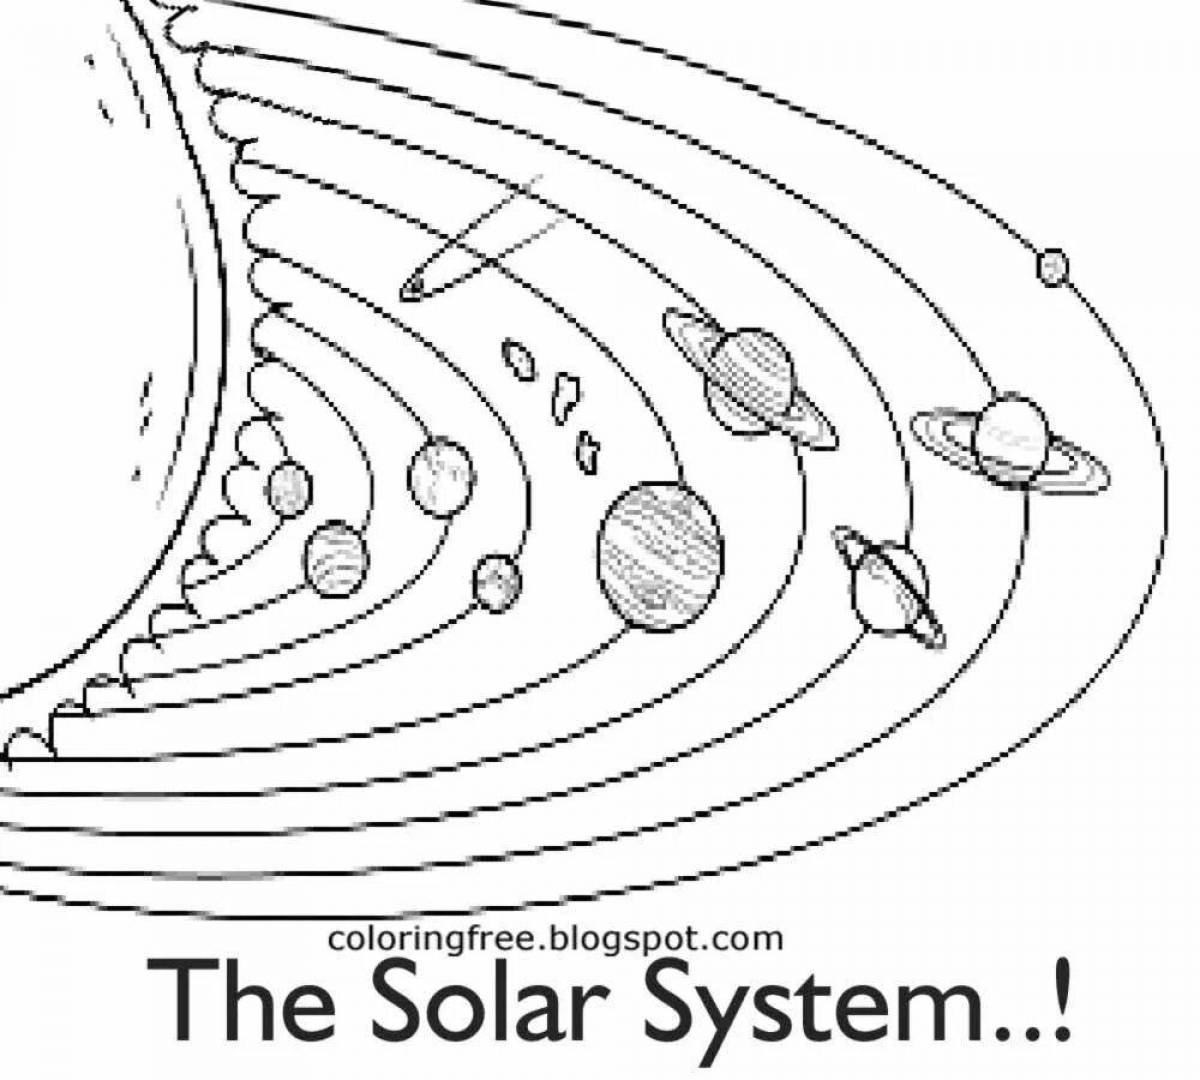 Artistic coloring of the solar system planets in order from the sun with names